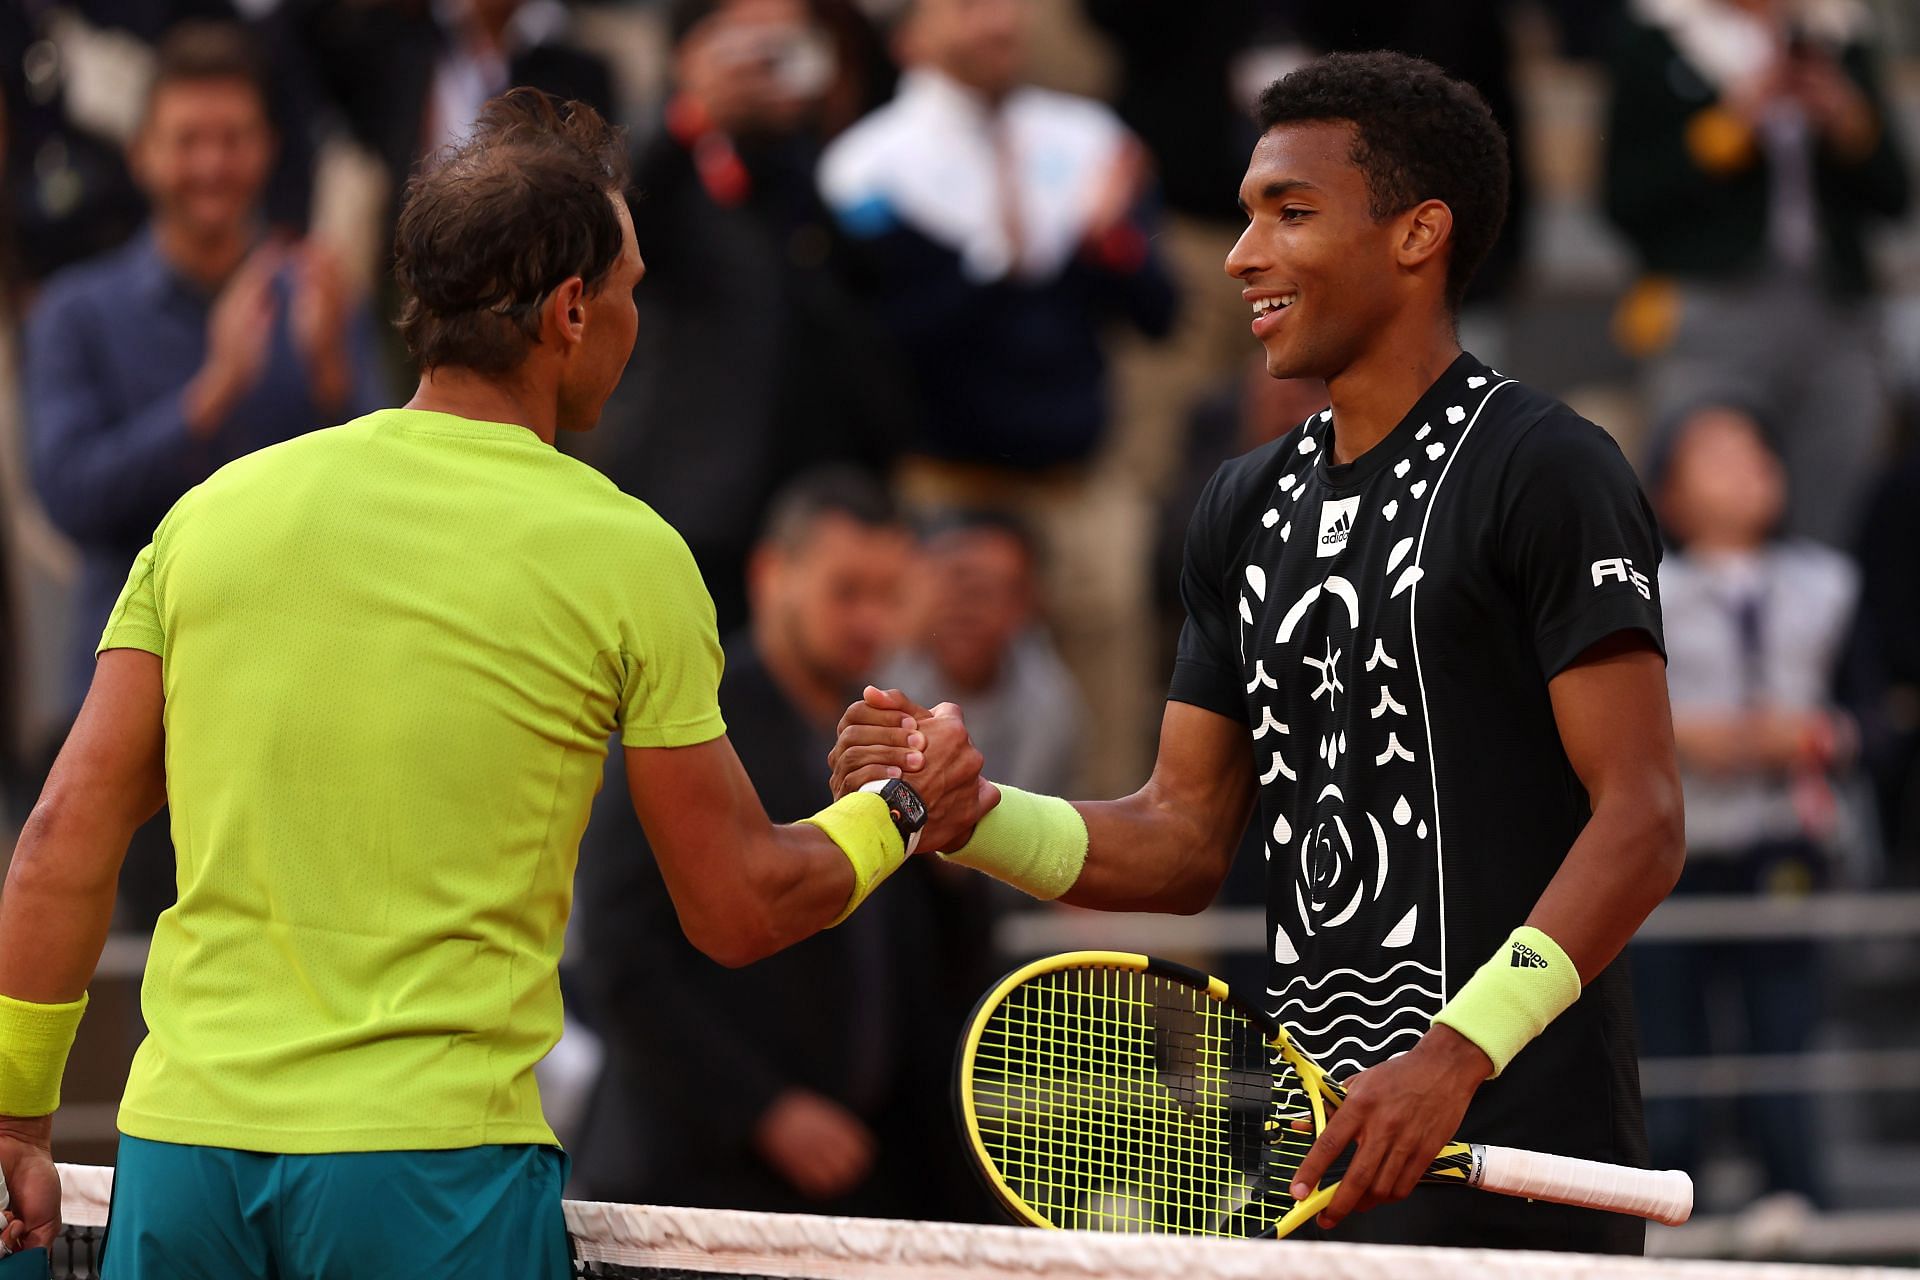 Rafael Nadal and Felix Auger-Aliassime - 2022 French Open